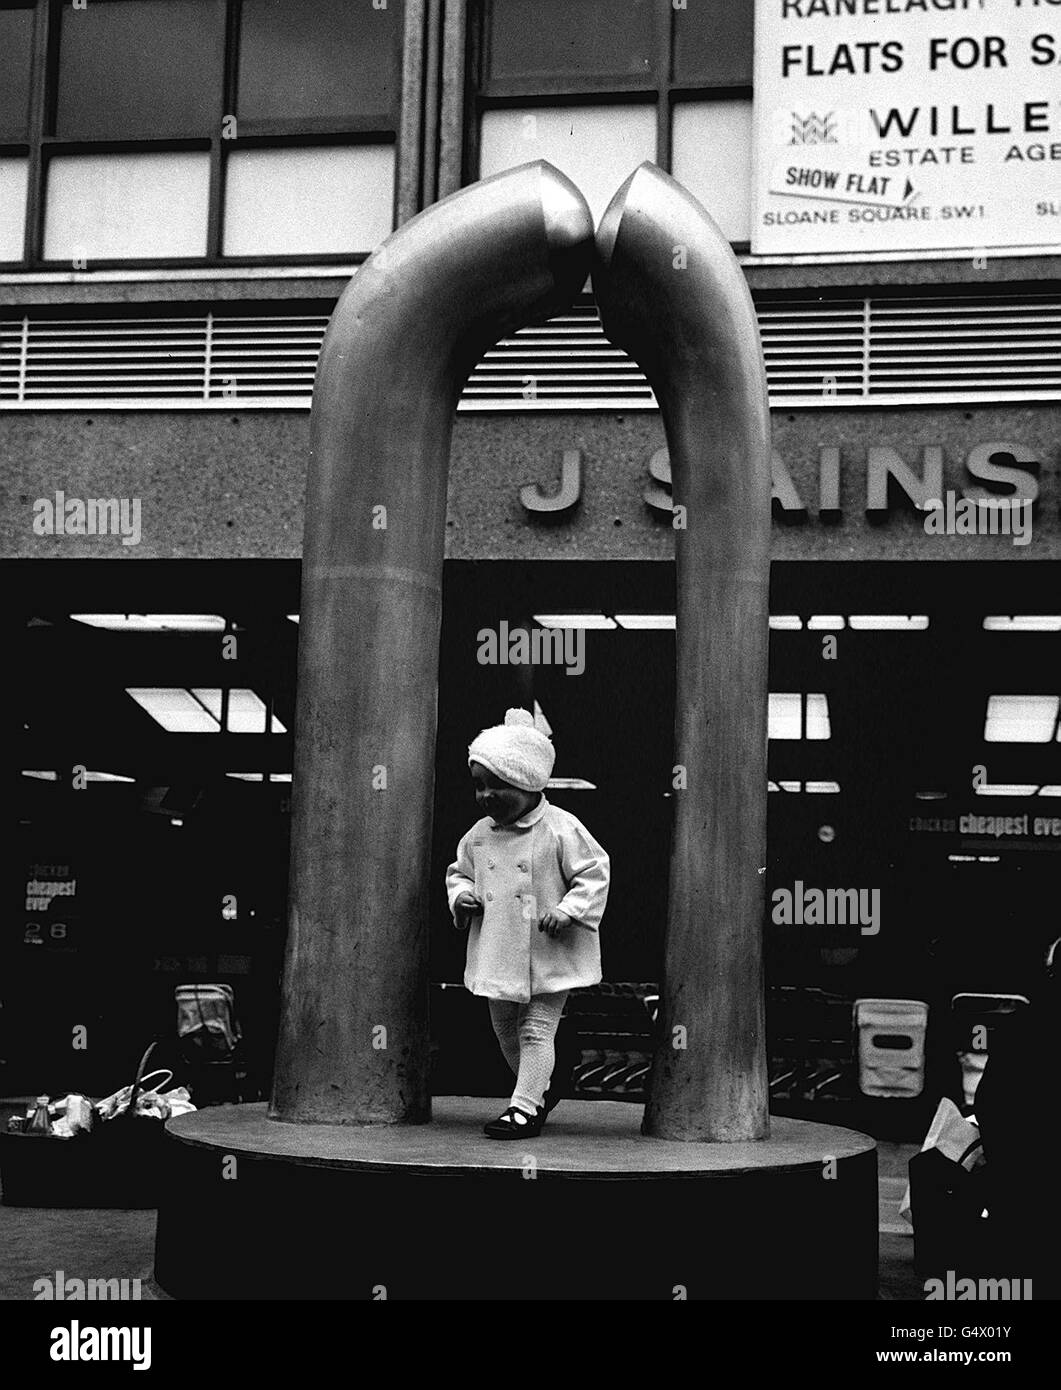 PA NEWS PHOTO 25/2/67 A CHILD PLAYS ON A SCULPTURE OUTSIDE A SAINSBURY STORE OFF THE KING'S ROAD, CHELSEA, LONDON. Stock Photo